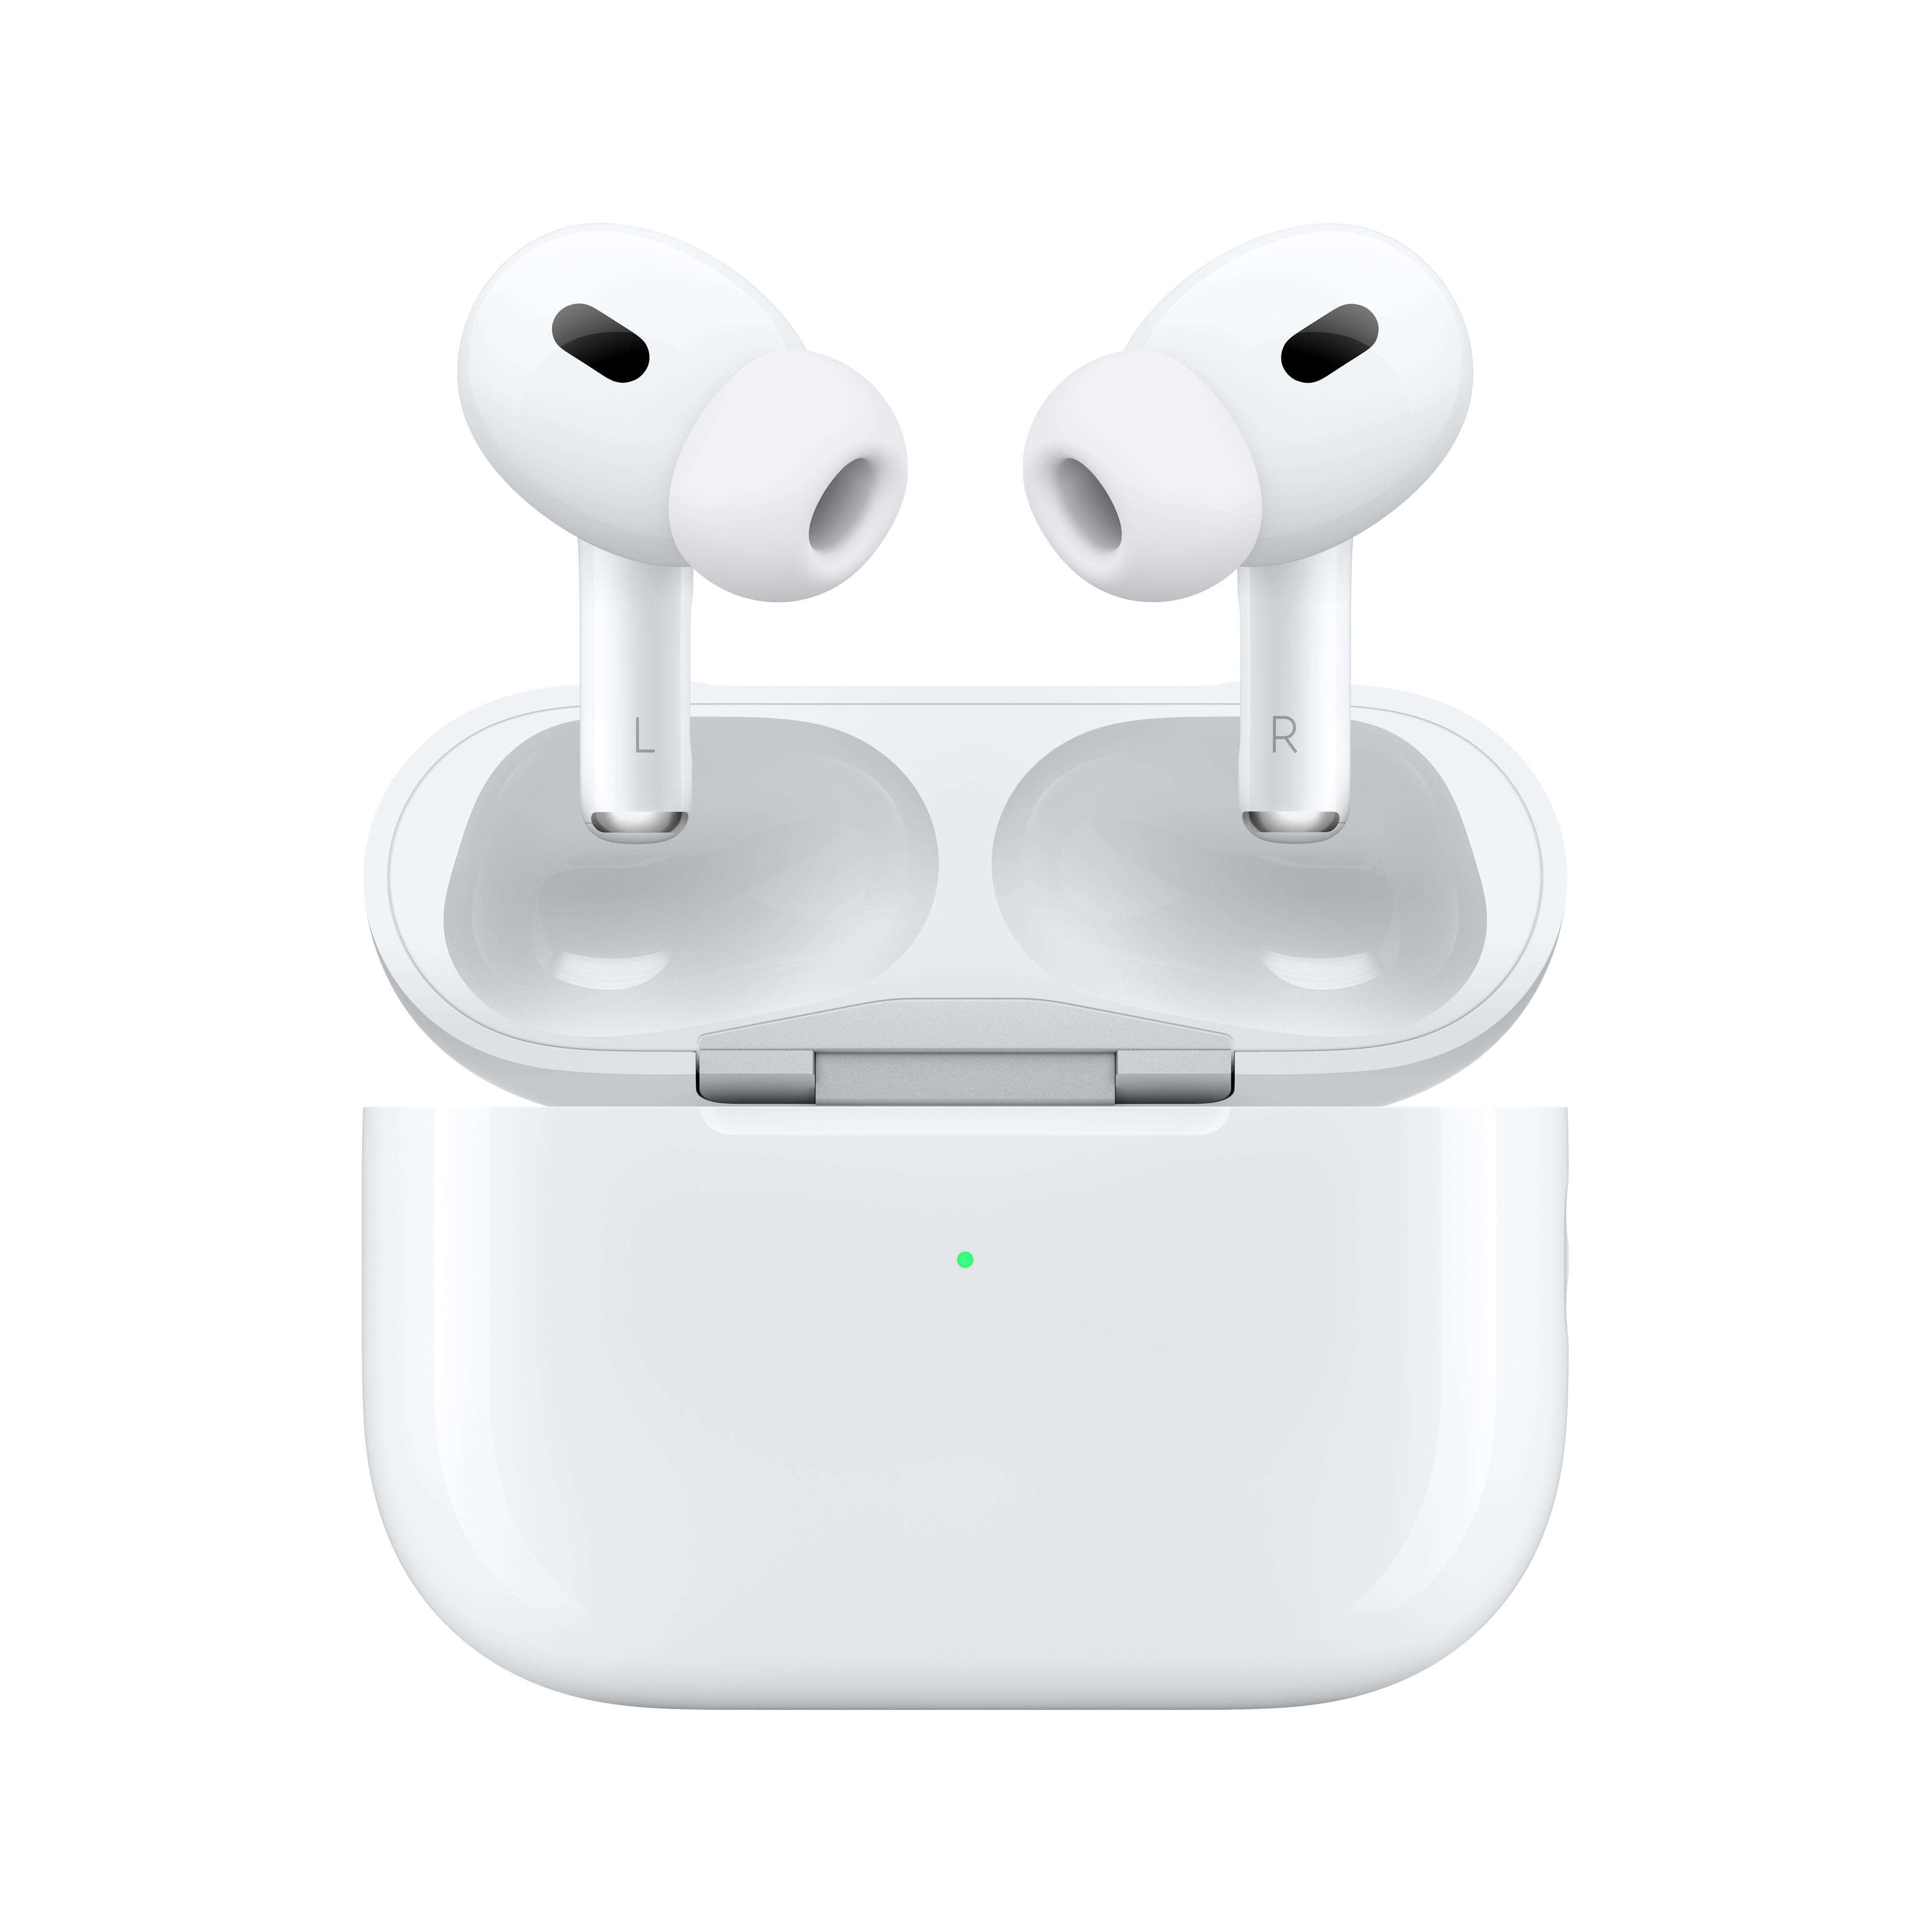 SEA_AirPods_Pro_2nd_Gen_PDP_Image_Position-2.jpg